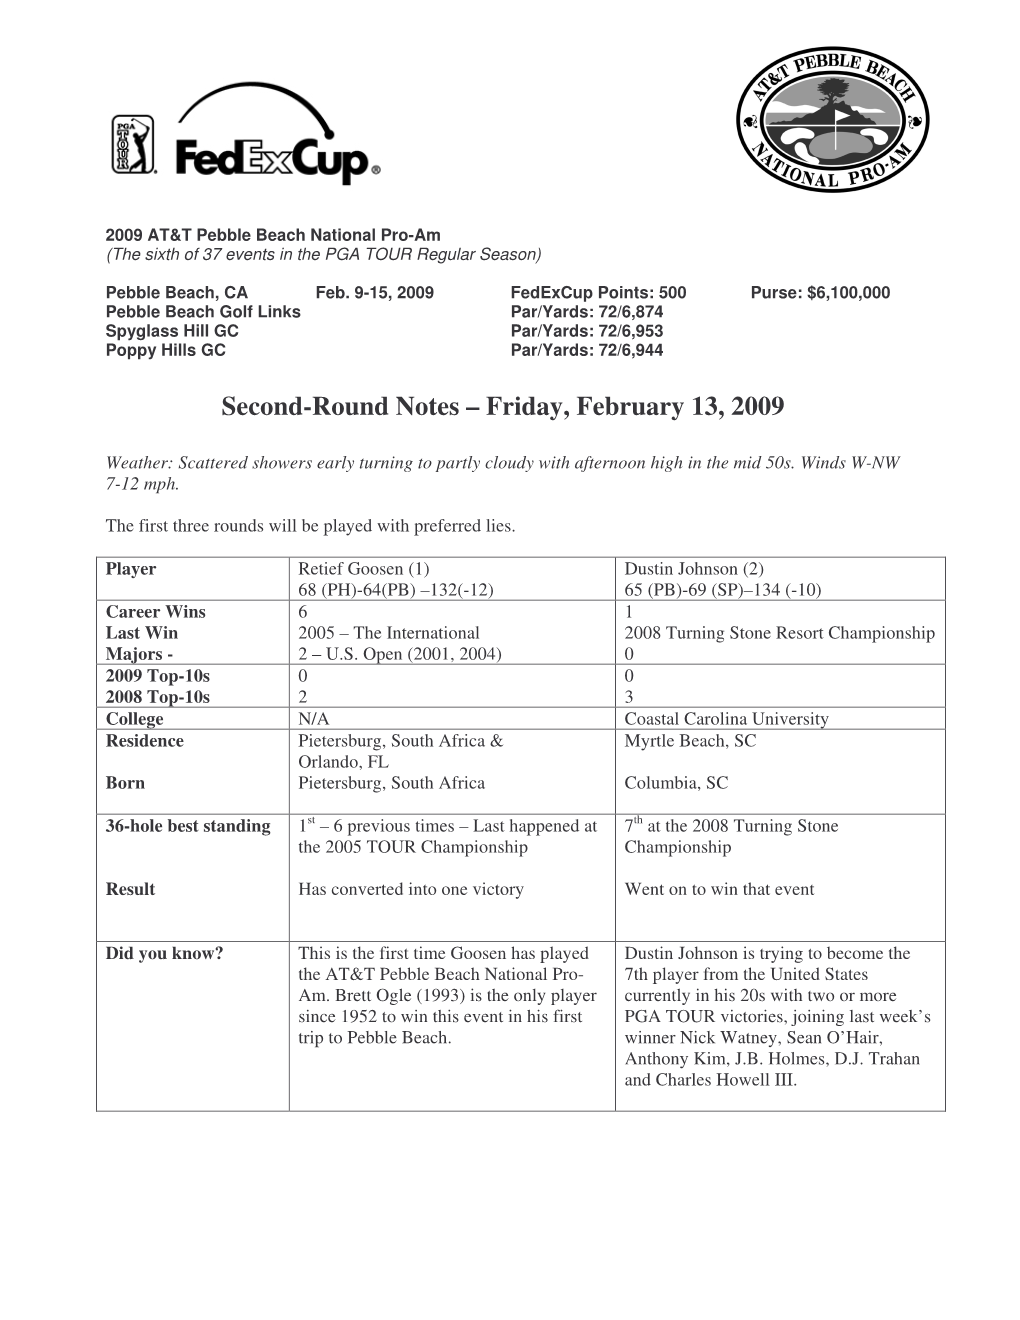 2009 AT&T Pebble Beach Round Two Notebook